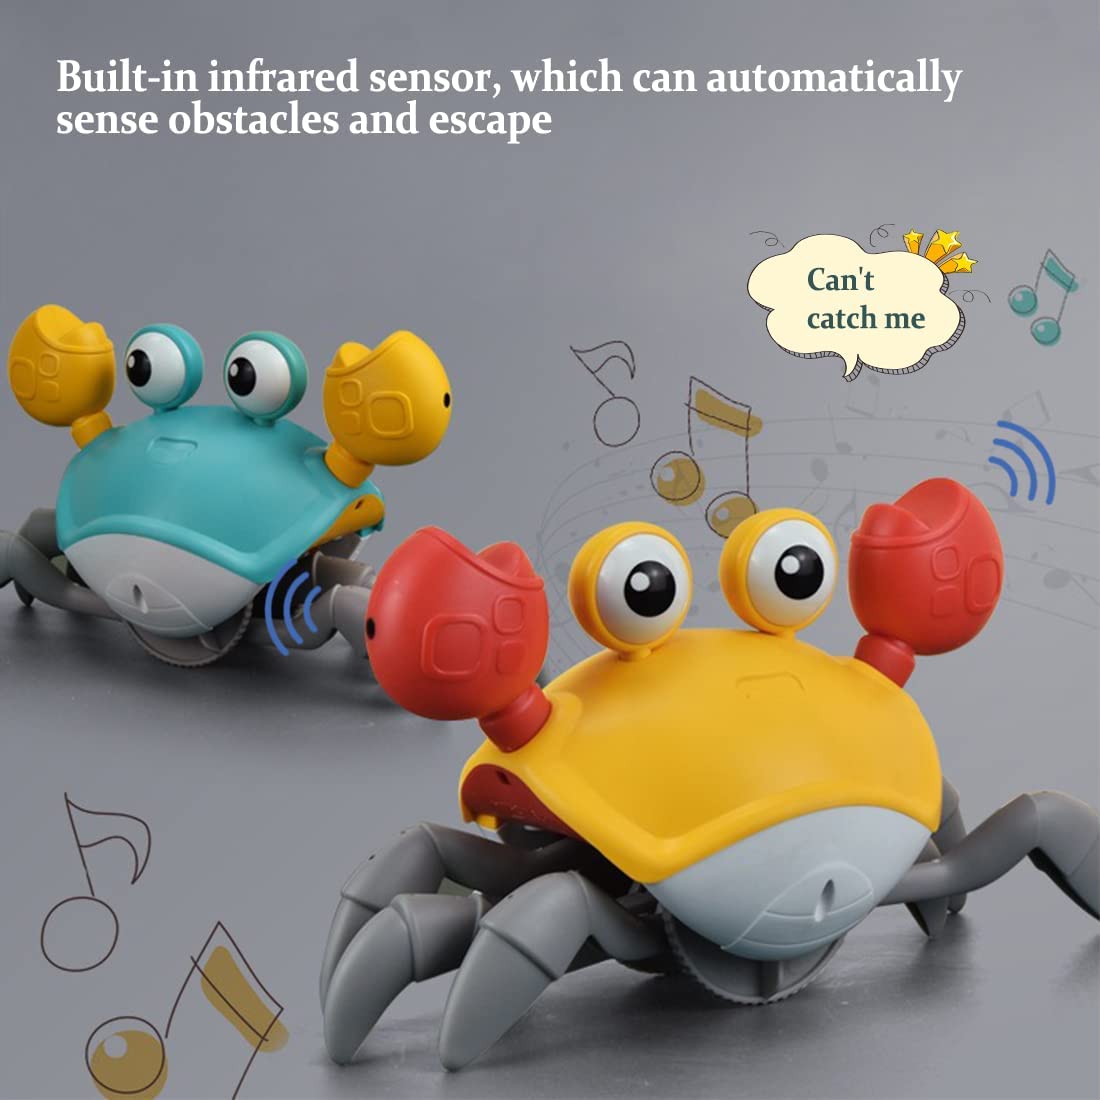 Crawling Crab Baby Toys with Music